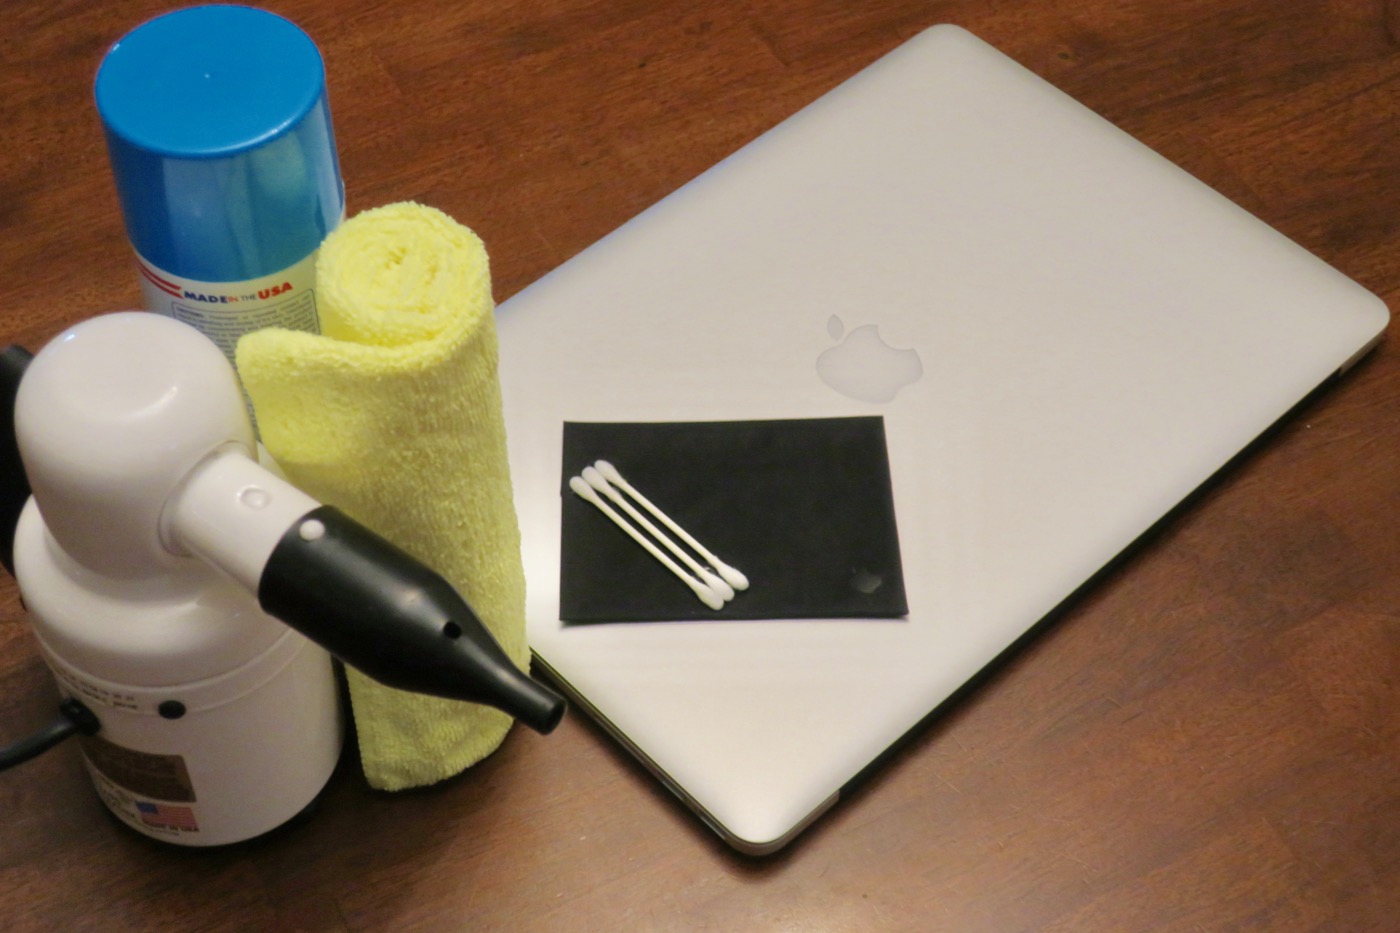 Mac cleaning supplies: compressed air, electronics cleaner, microfiber cloths, Q-tips